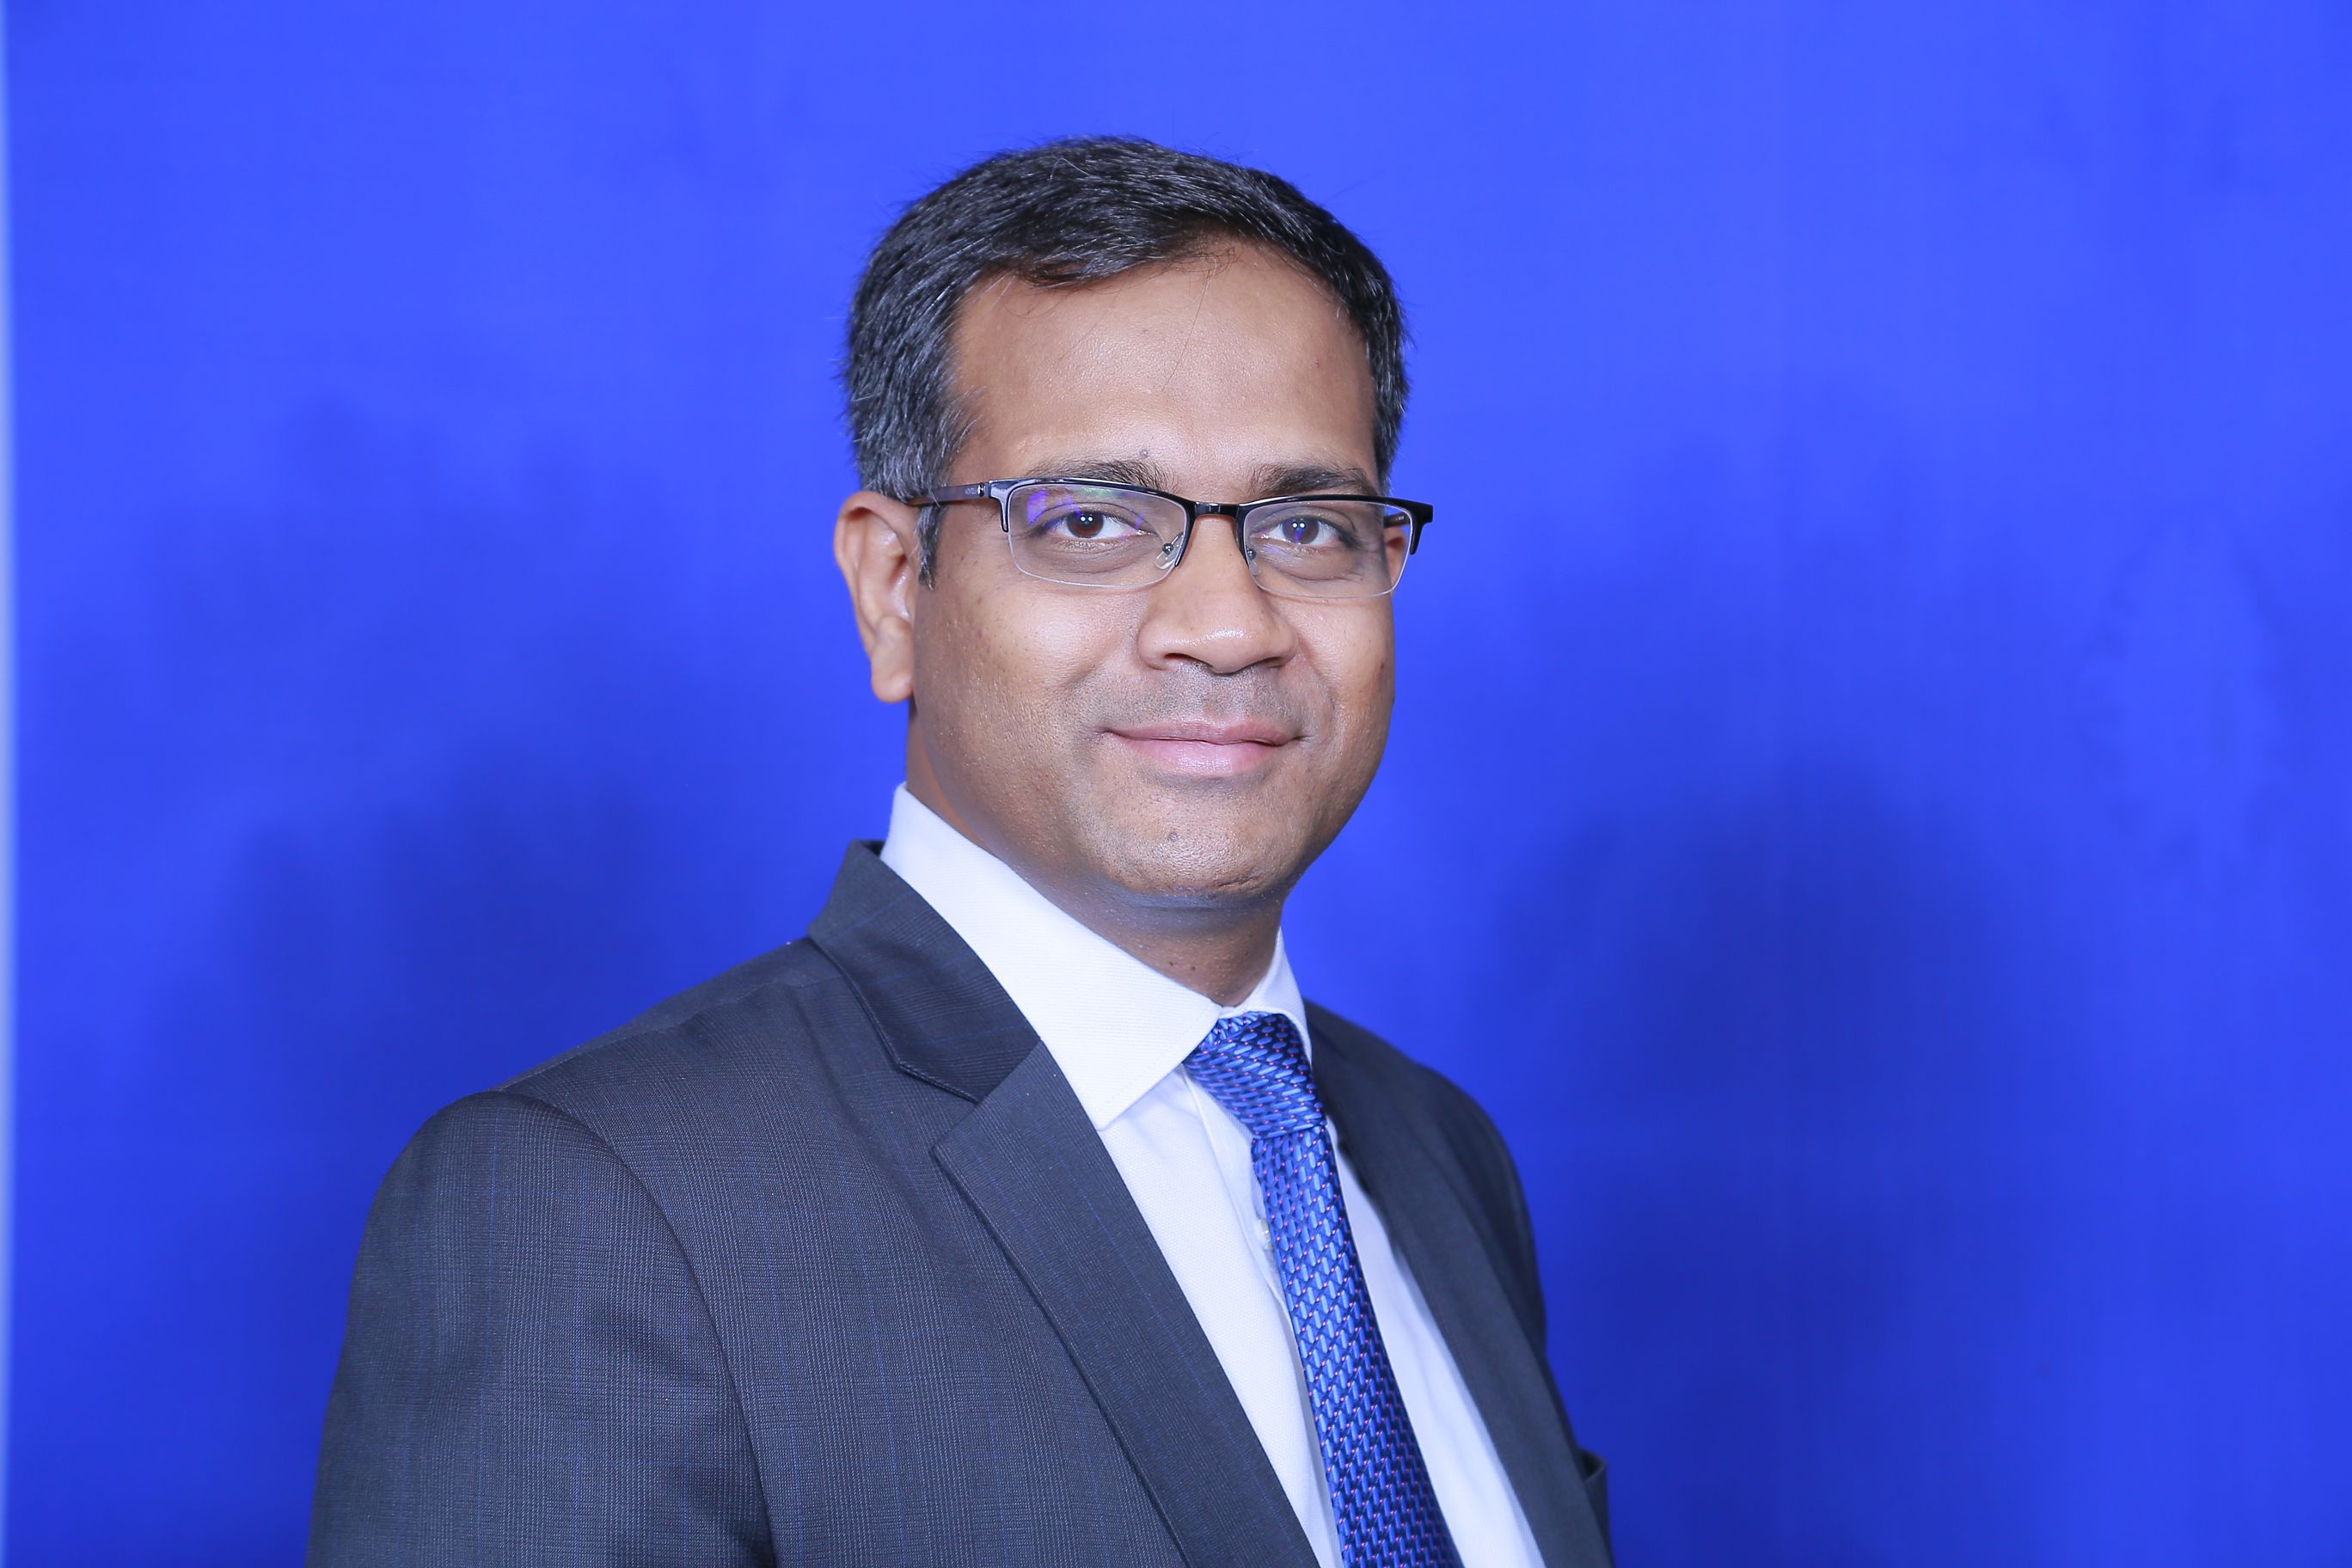 KPMG in India appoints Sandeep Paidi as Office Managing Partner of its Hyderabad office